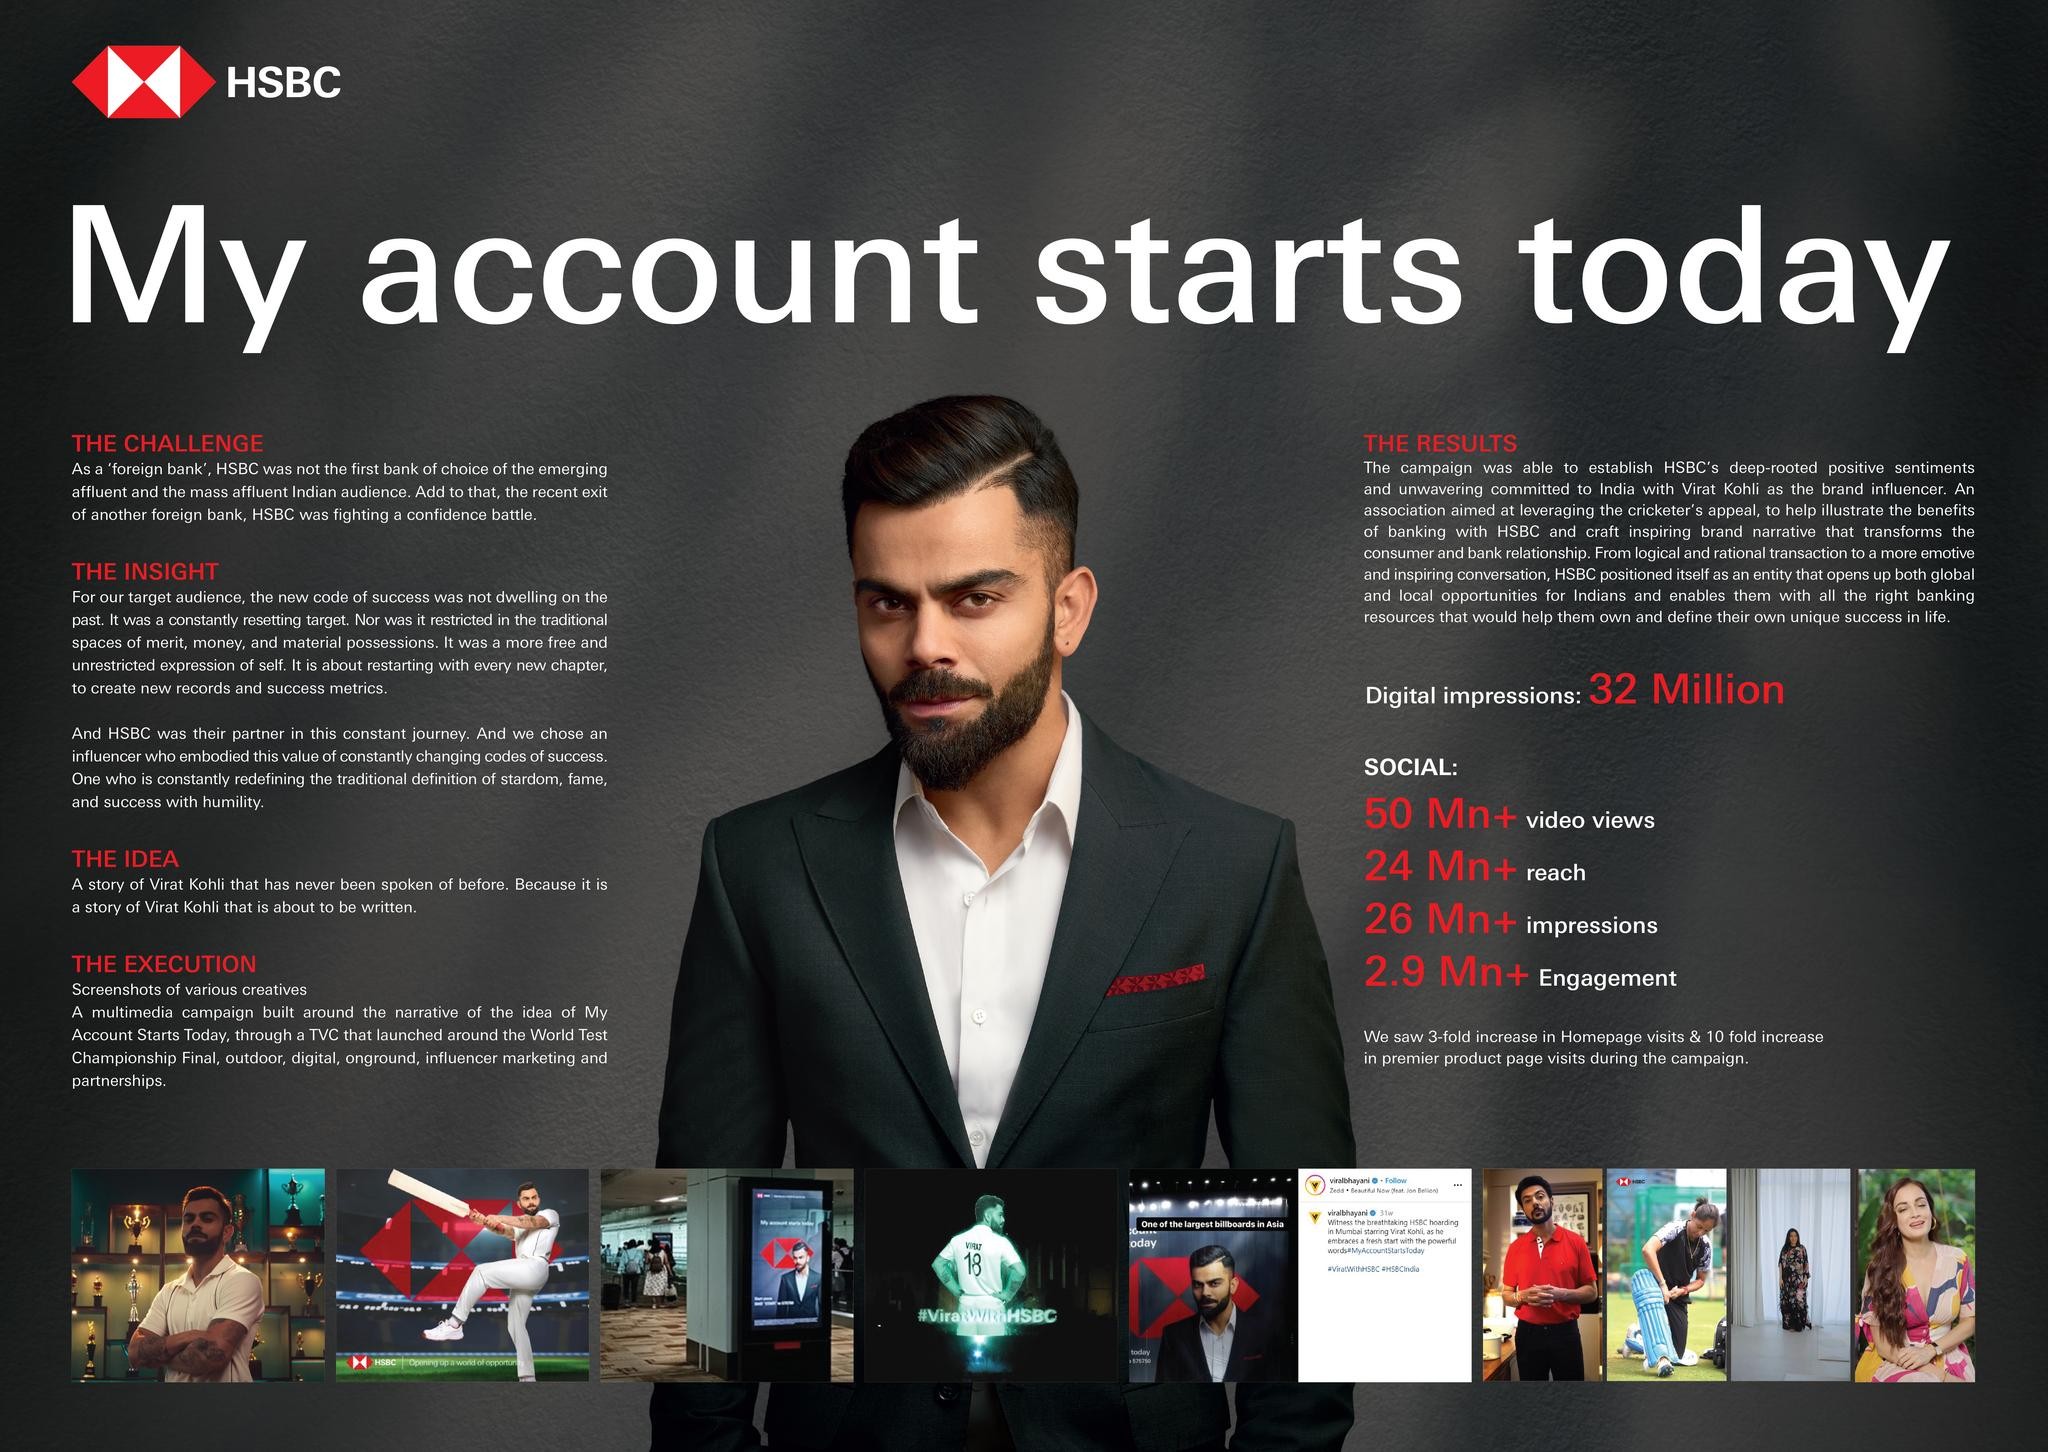 Onboarding the biggest Influencer as Brand Influencer for HSBC India